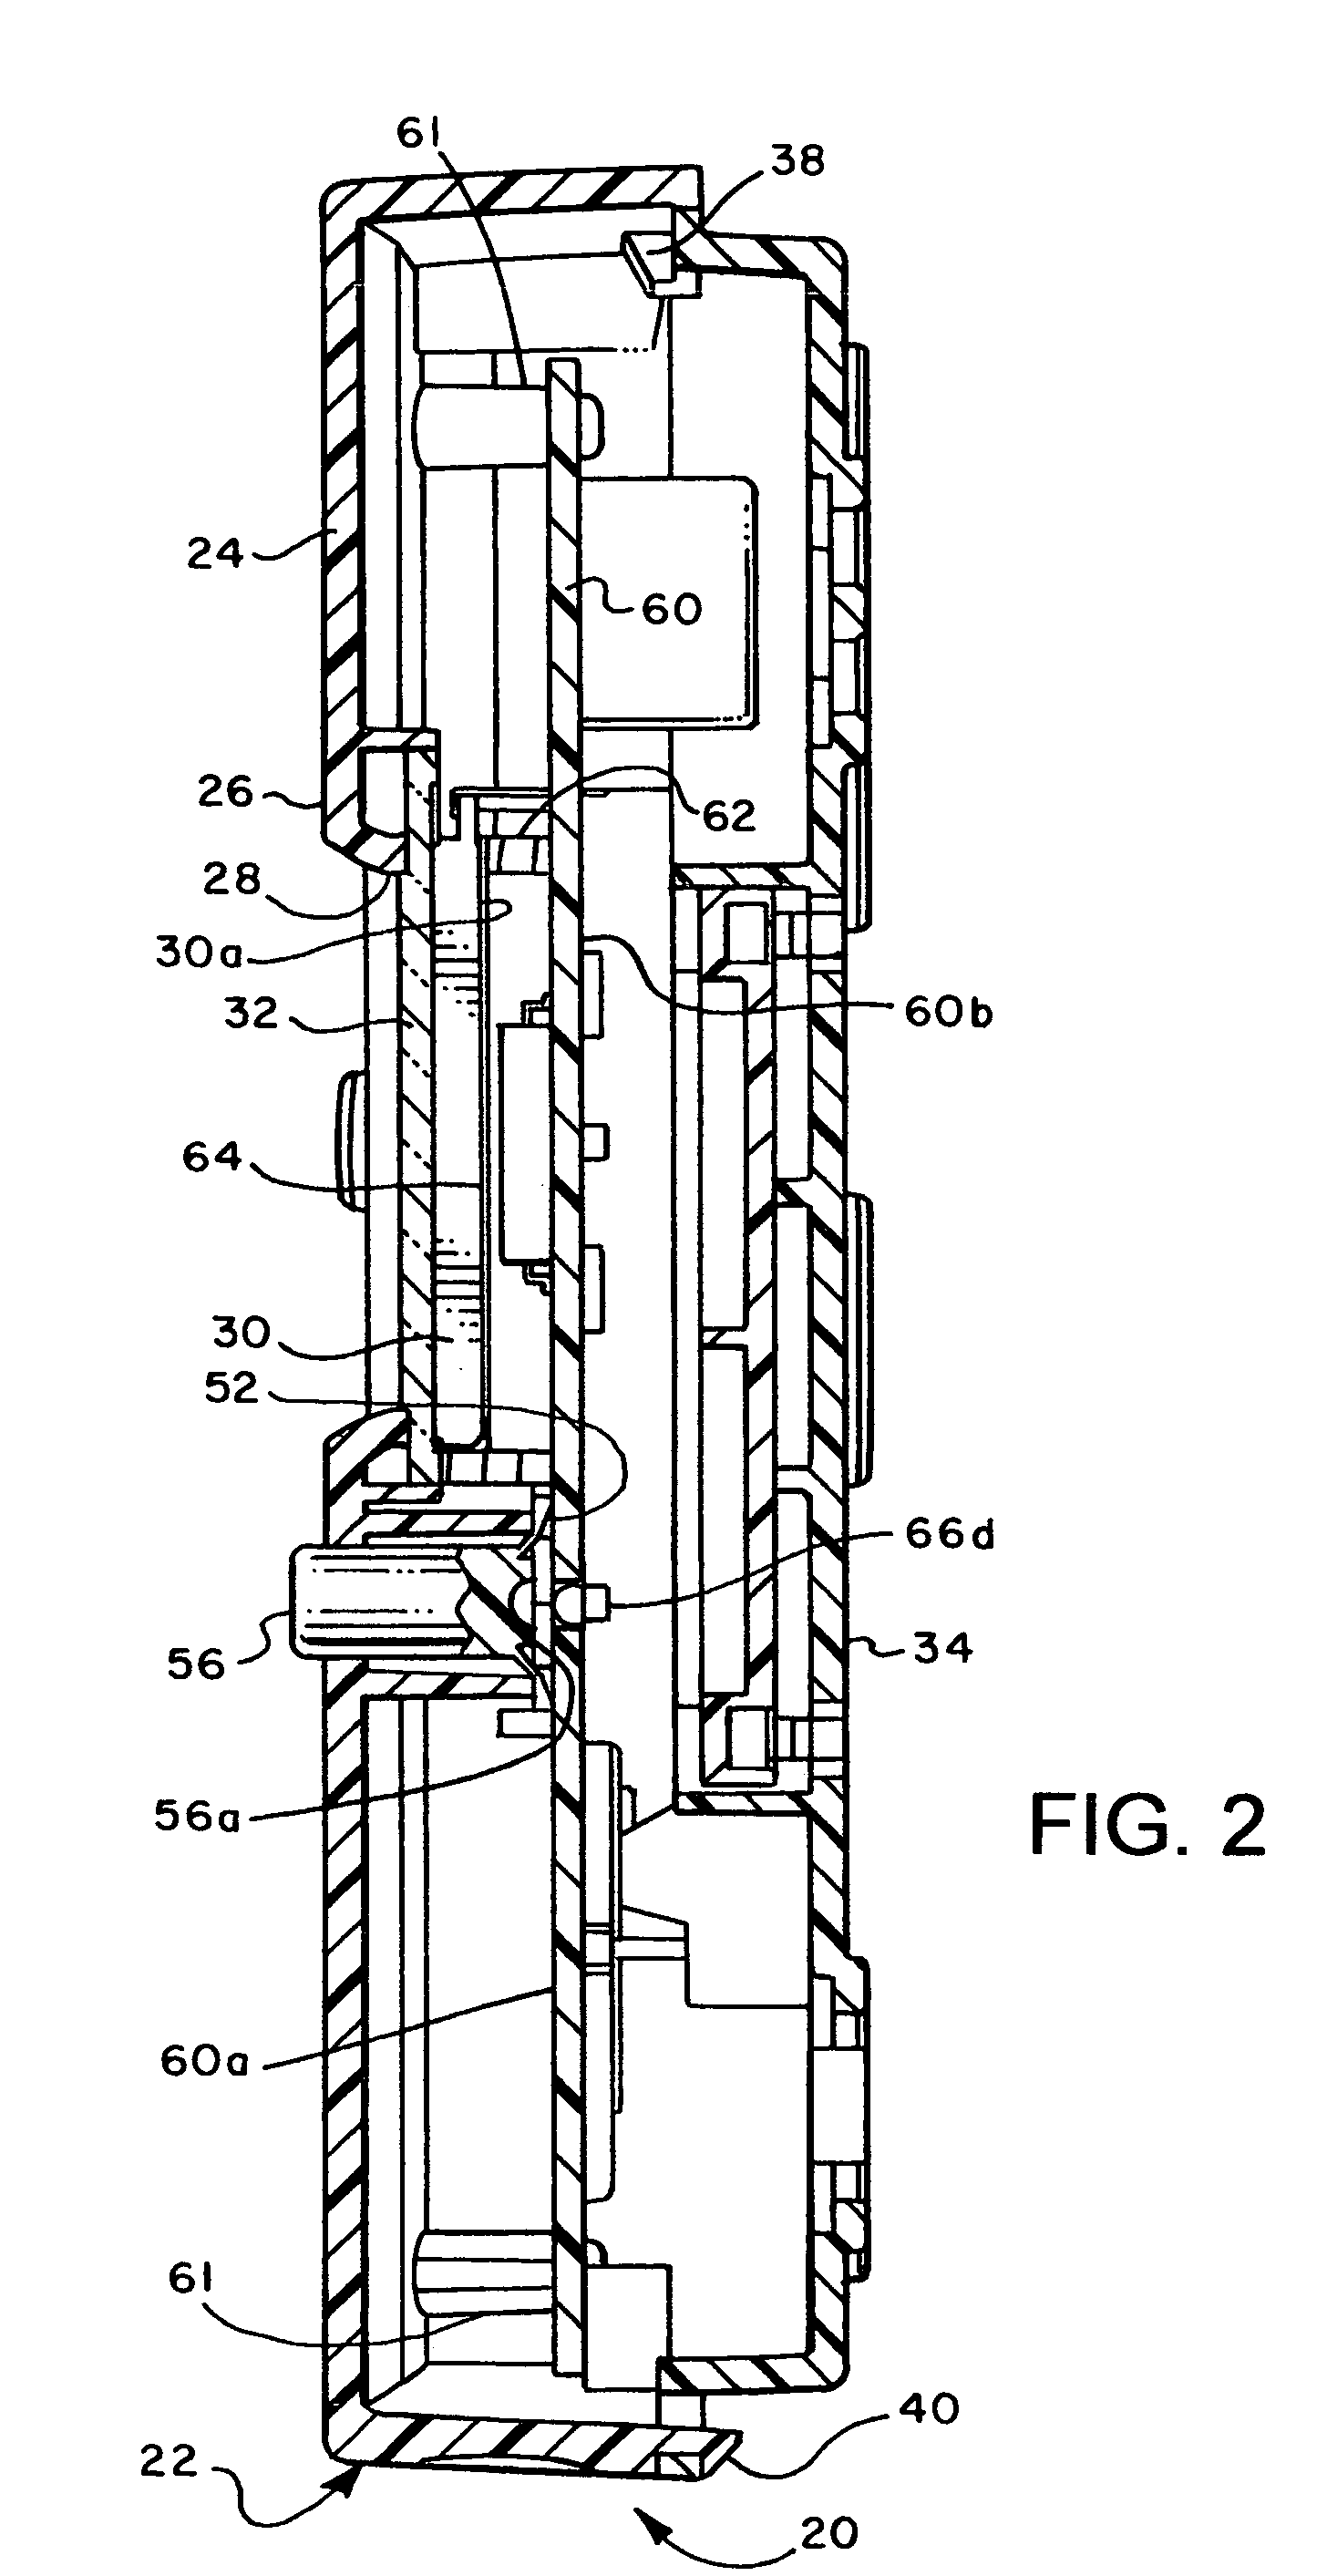 Thermostat with energy saving backlit switch actuators and visual display